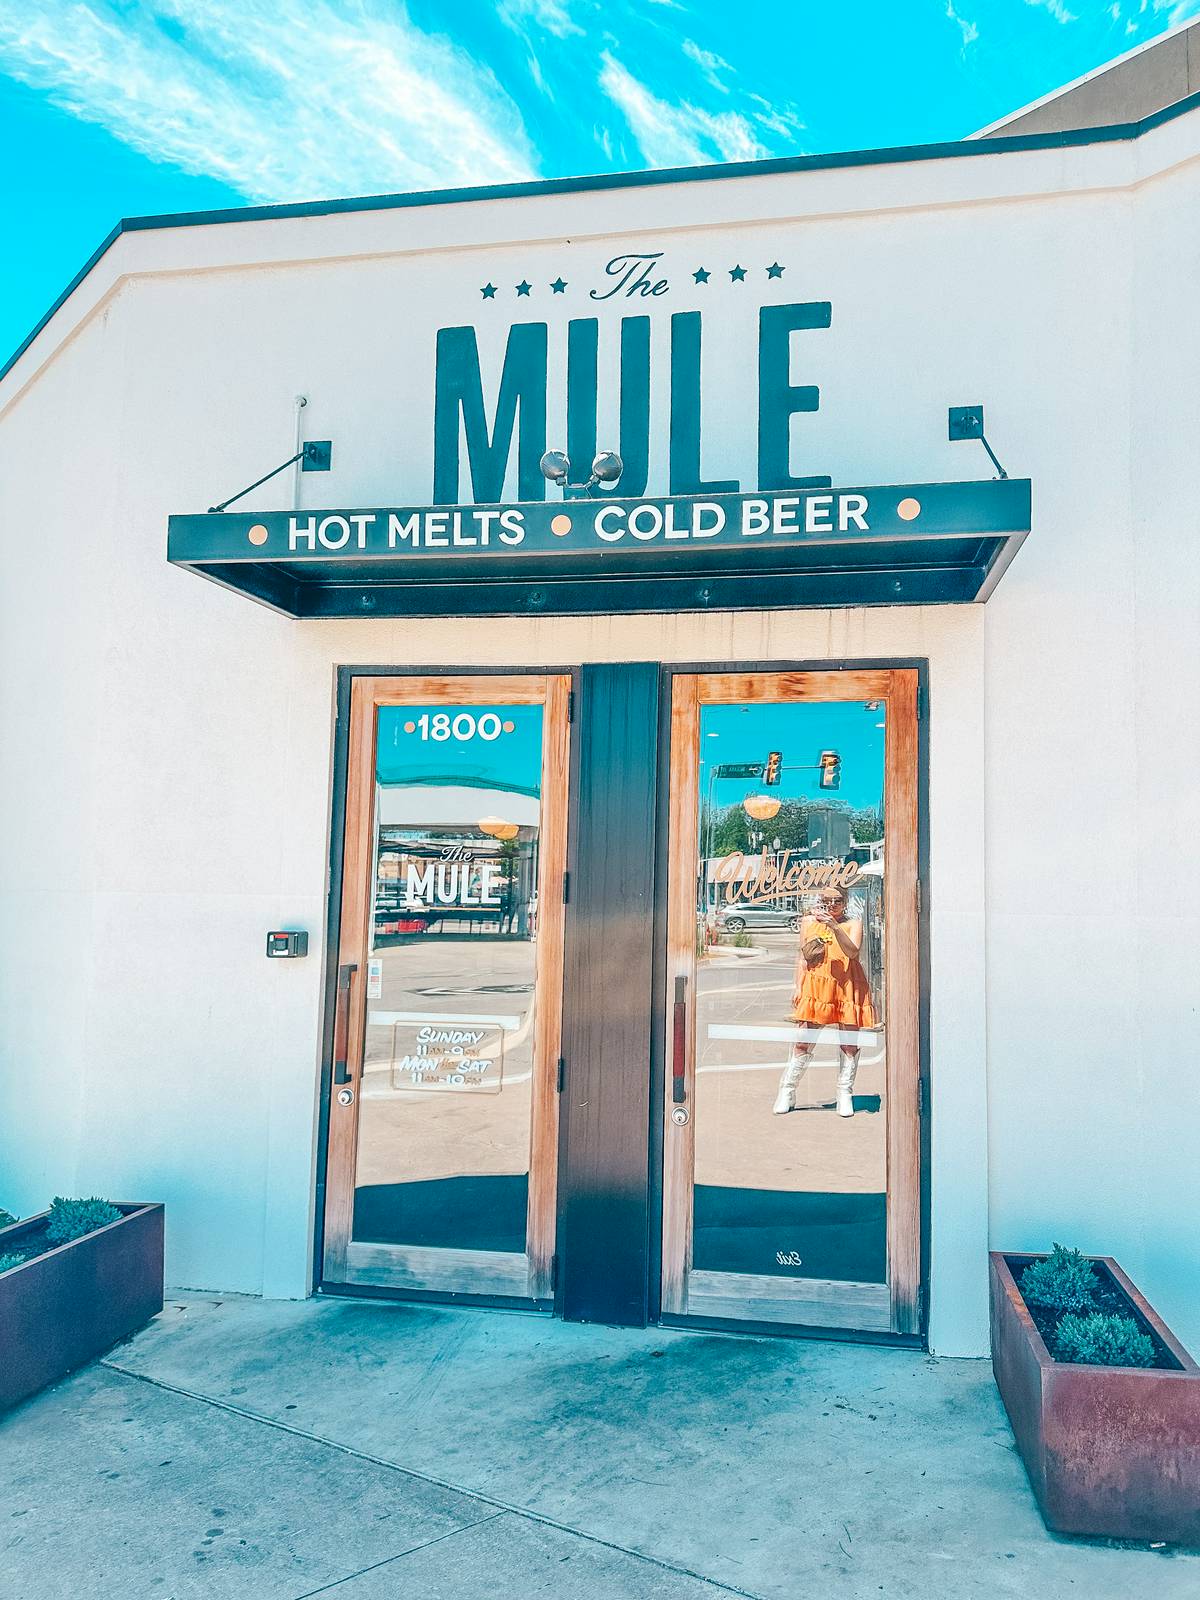 The Mule restaurant in Oklahoma City